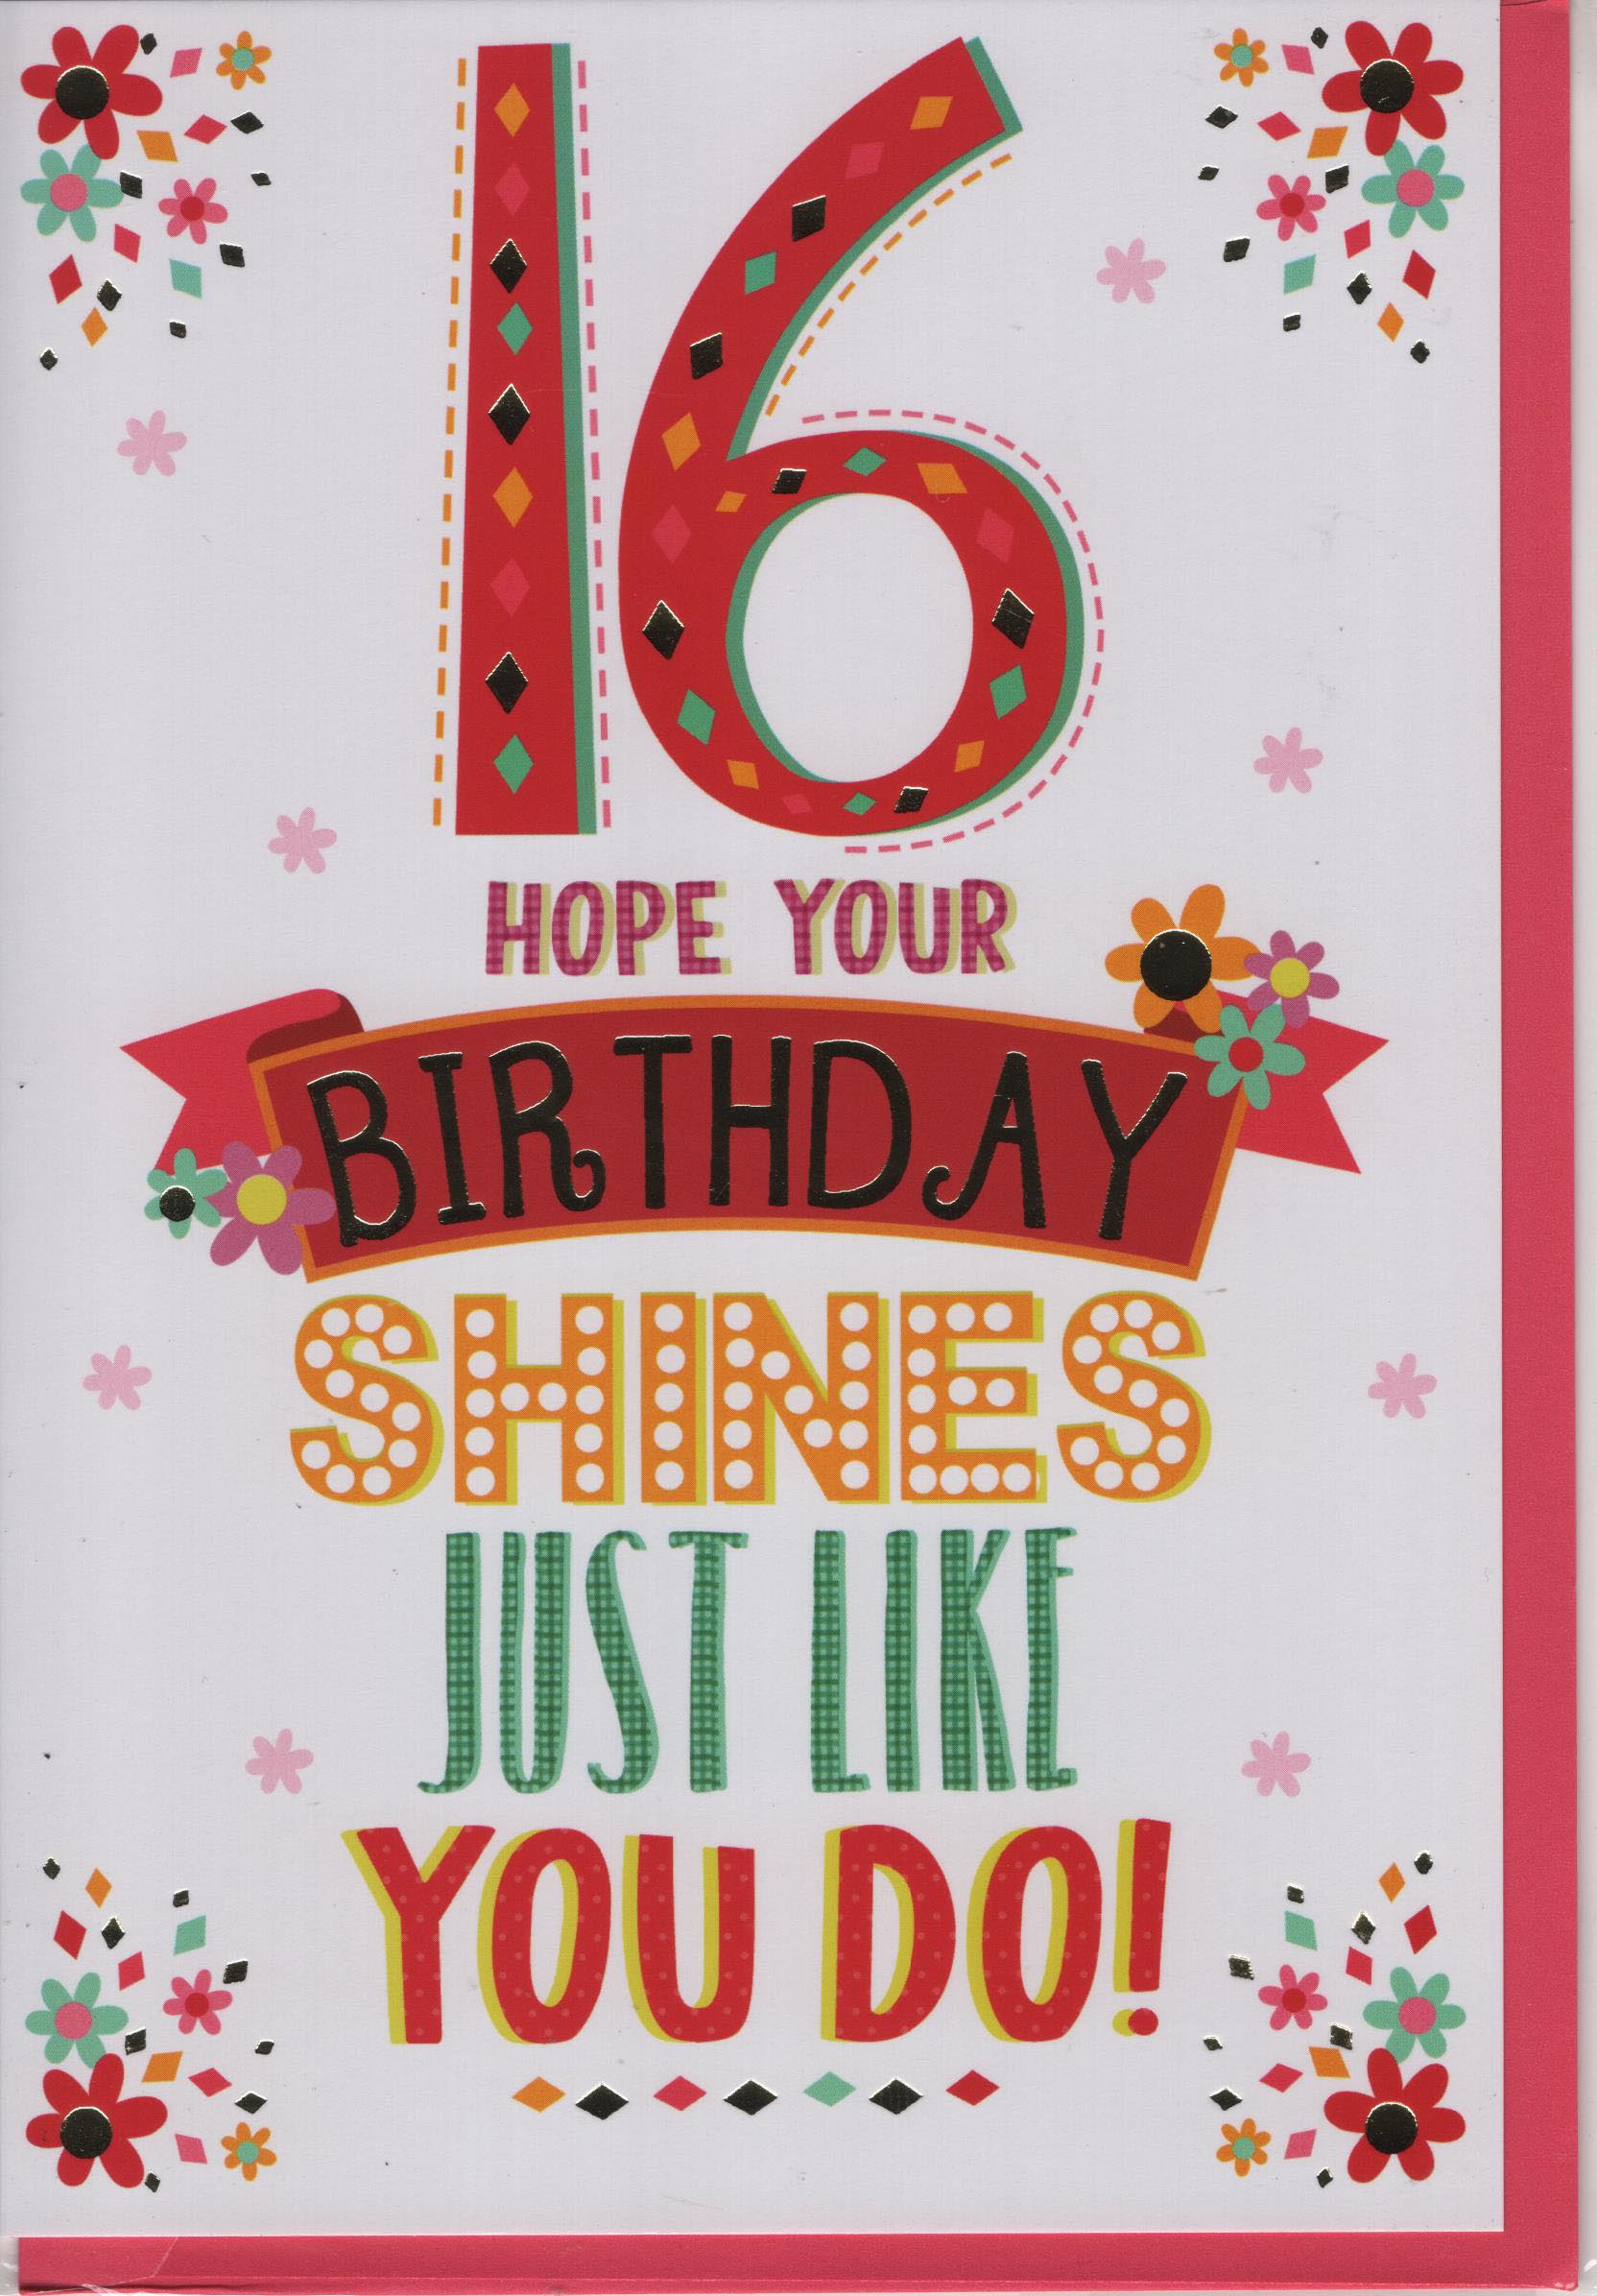 16 Hope Your Birthday Shines Just Like You Do!